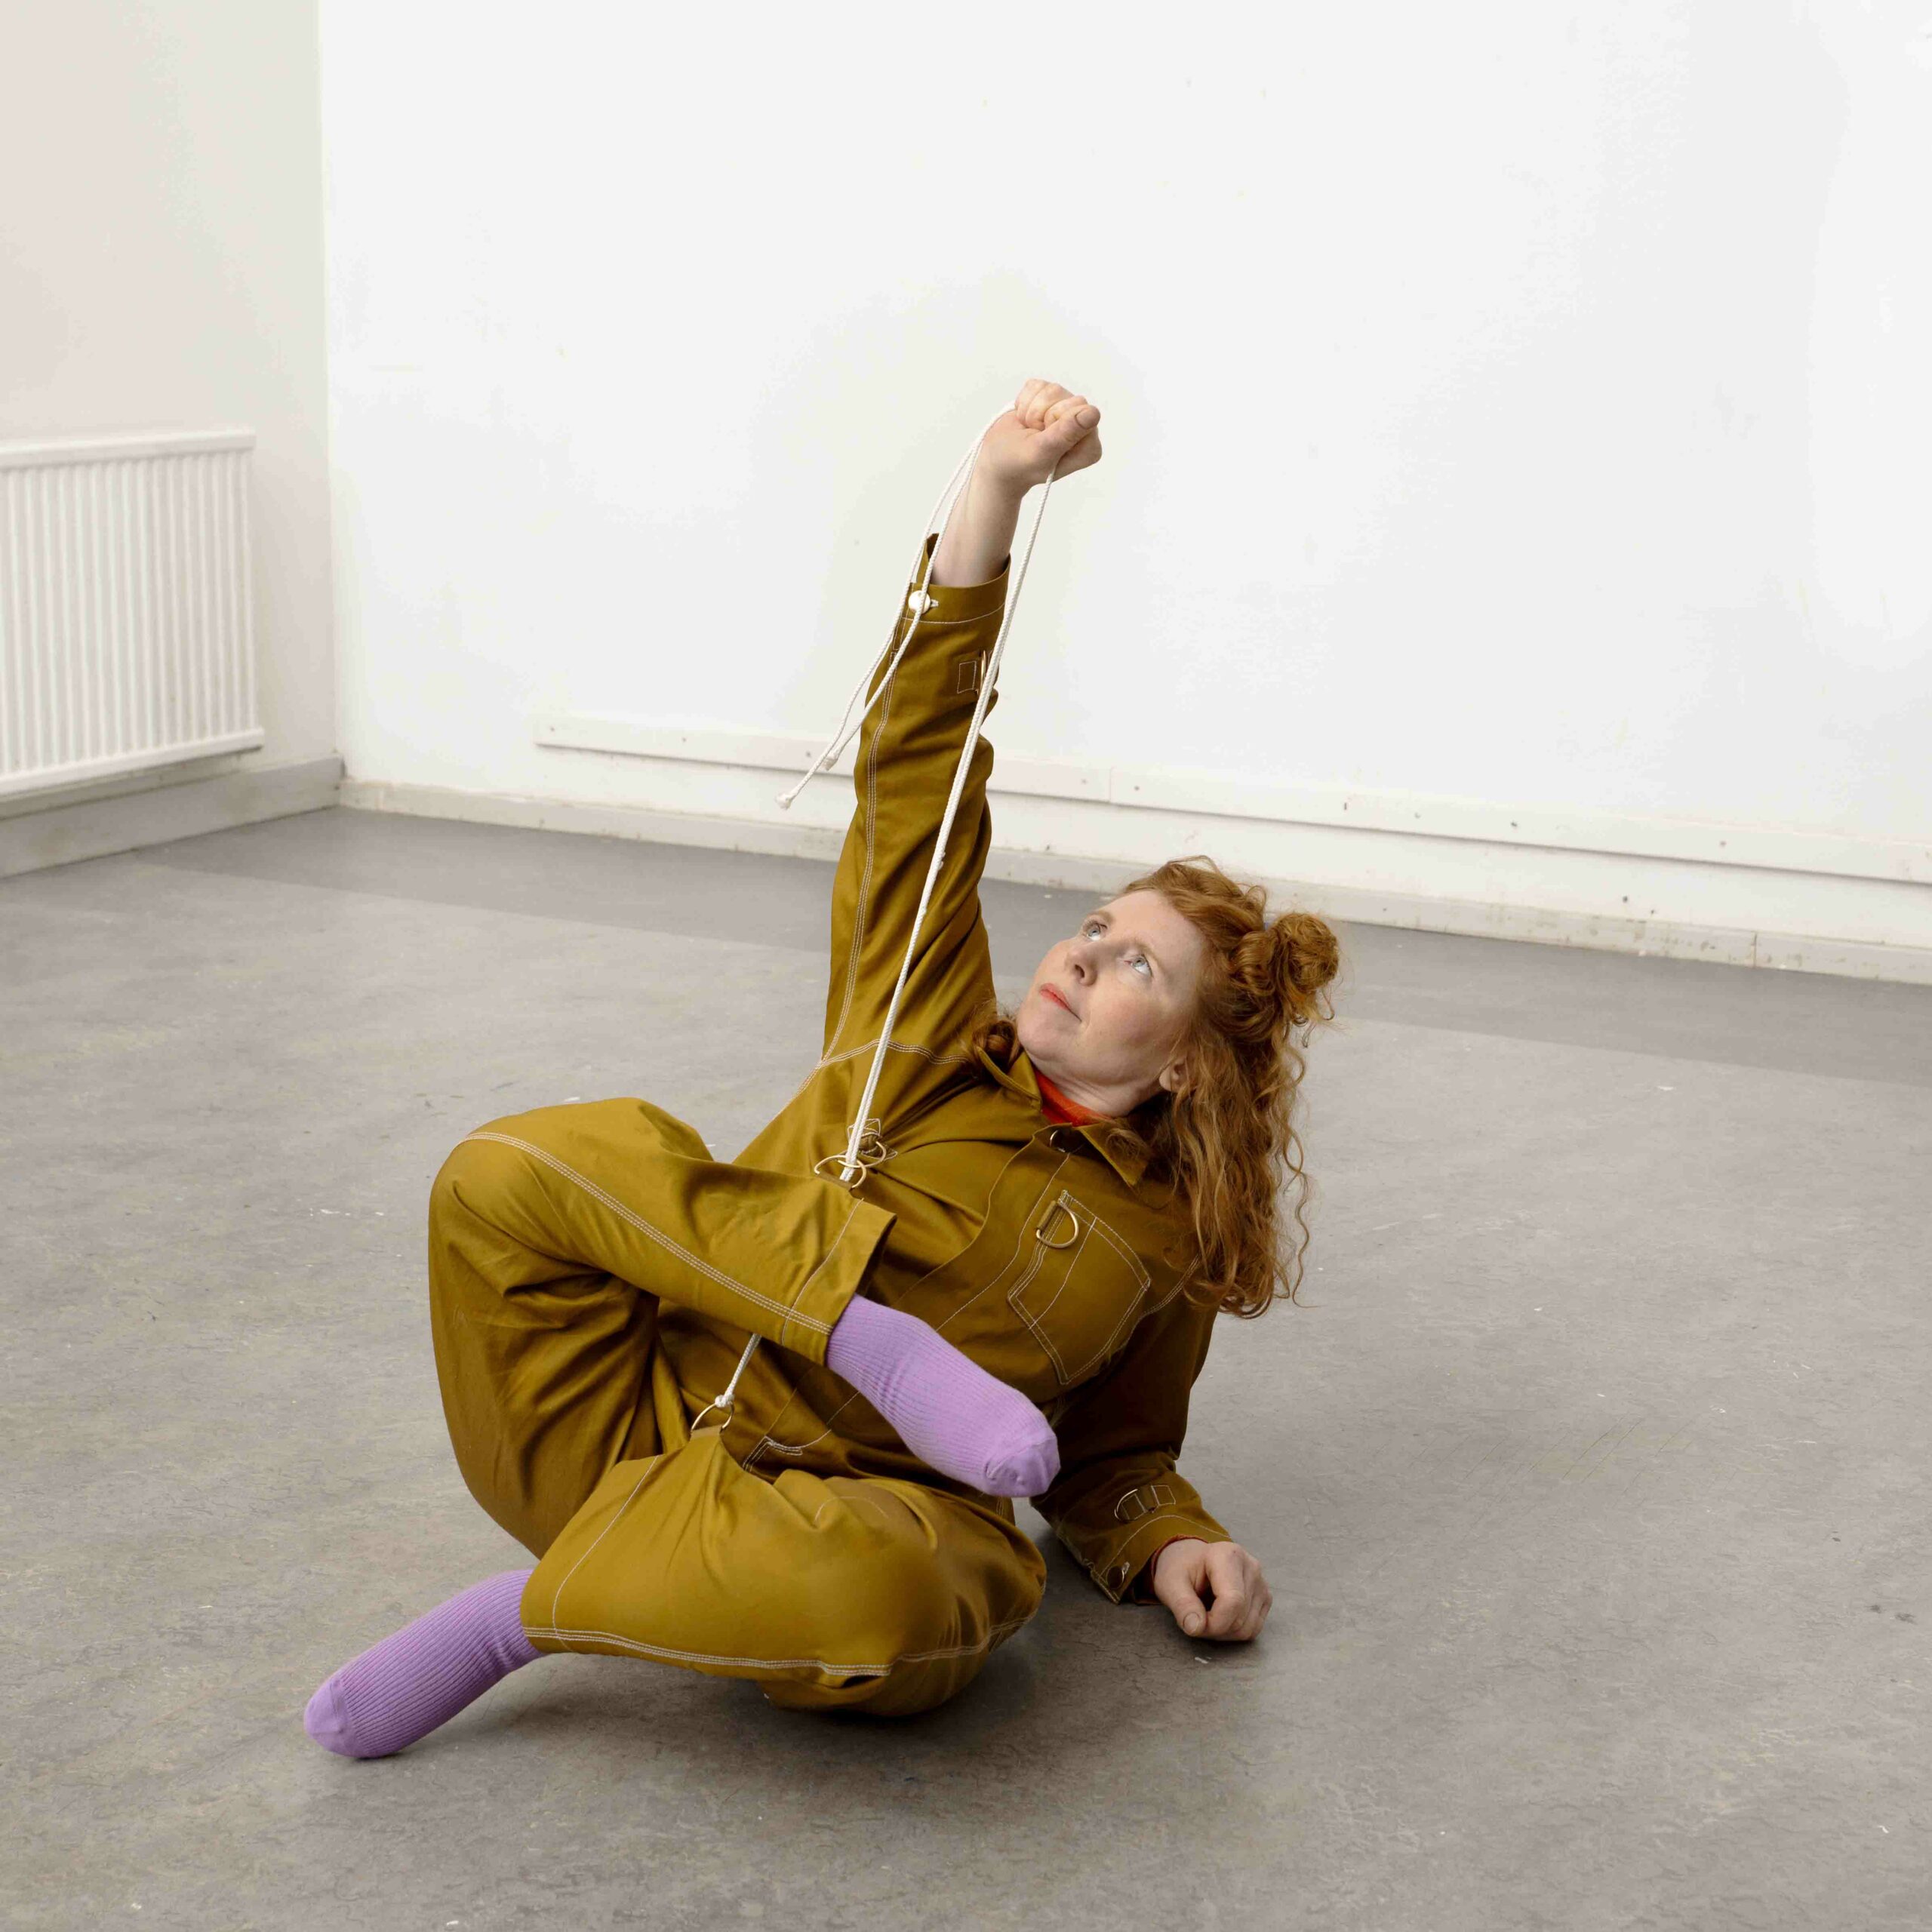 The image depicts a woman wearing a mustard-yellow dress and red hair lysing on the floor while lifting one of her legs with a string. Photo: Lars Dyrendom